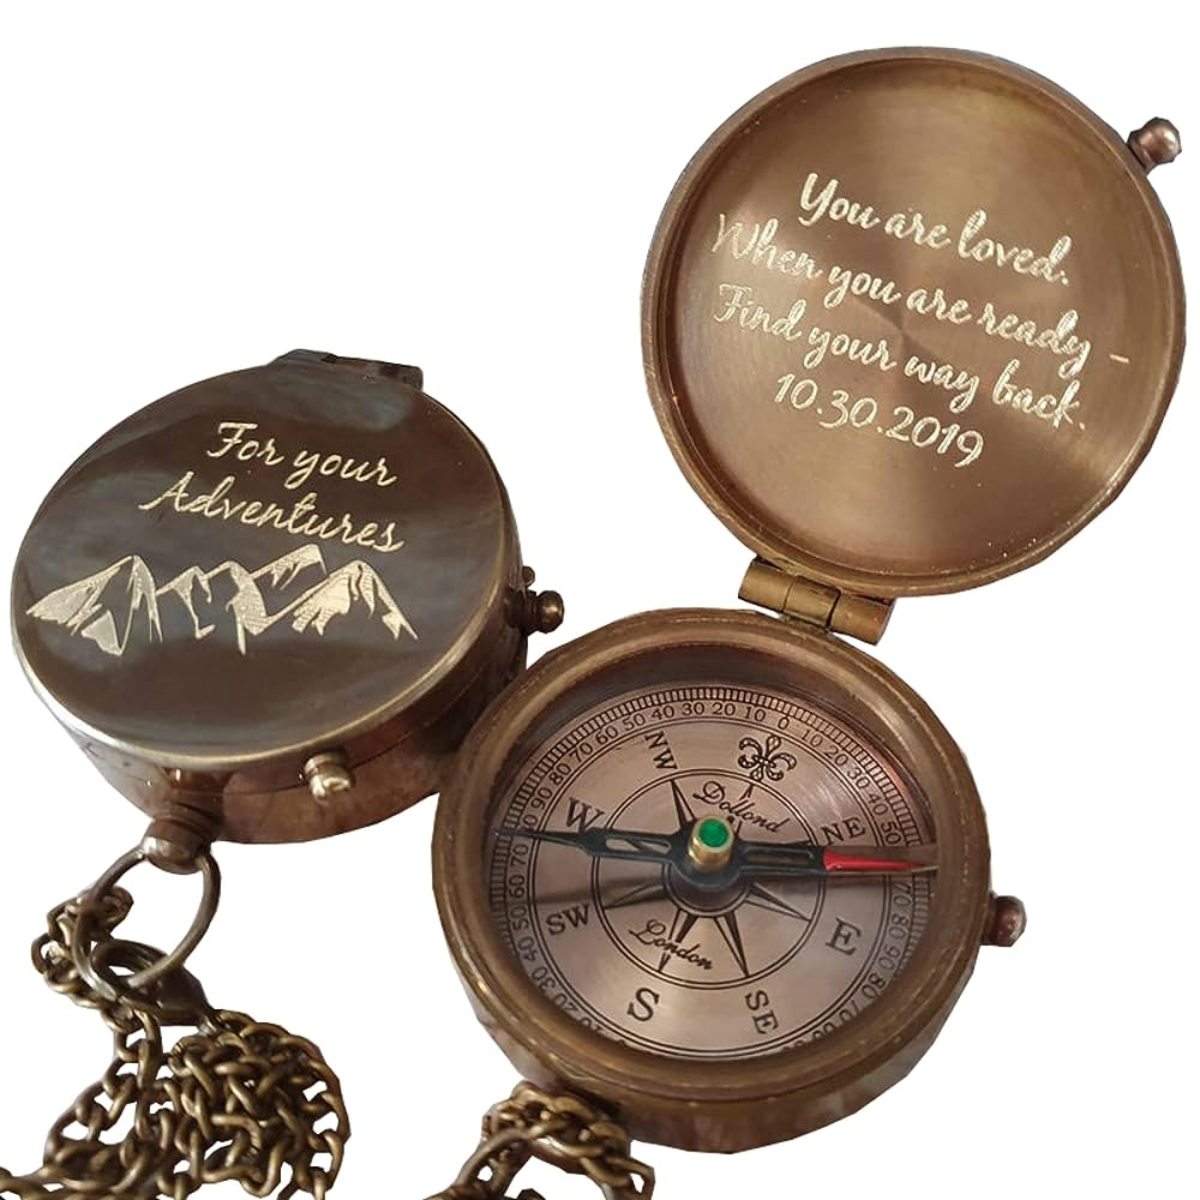 40. Navigate the Next 10 Years Together with an Engraved Brass Compass